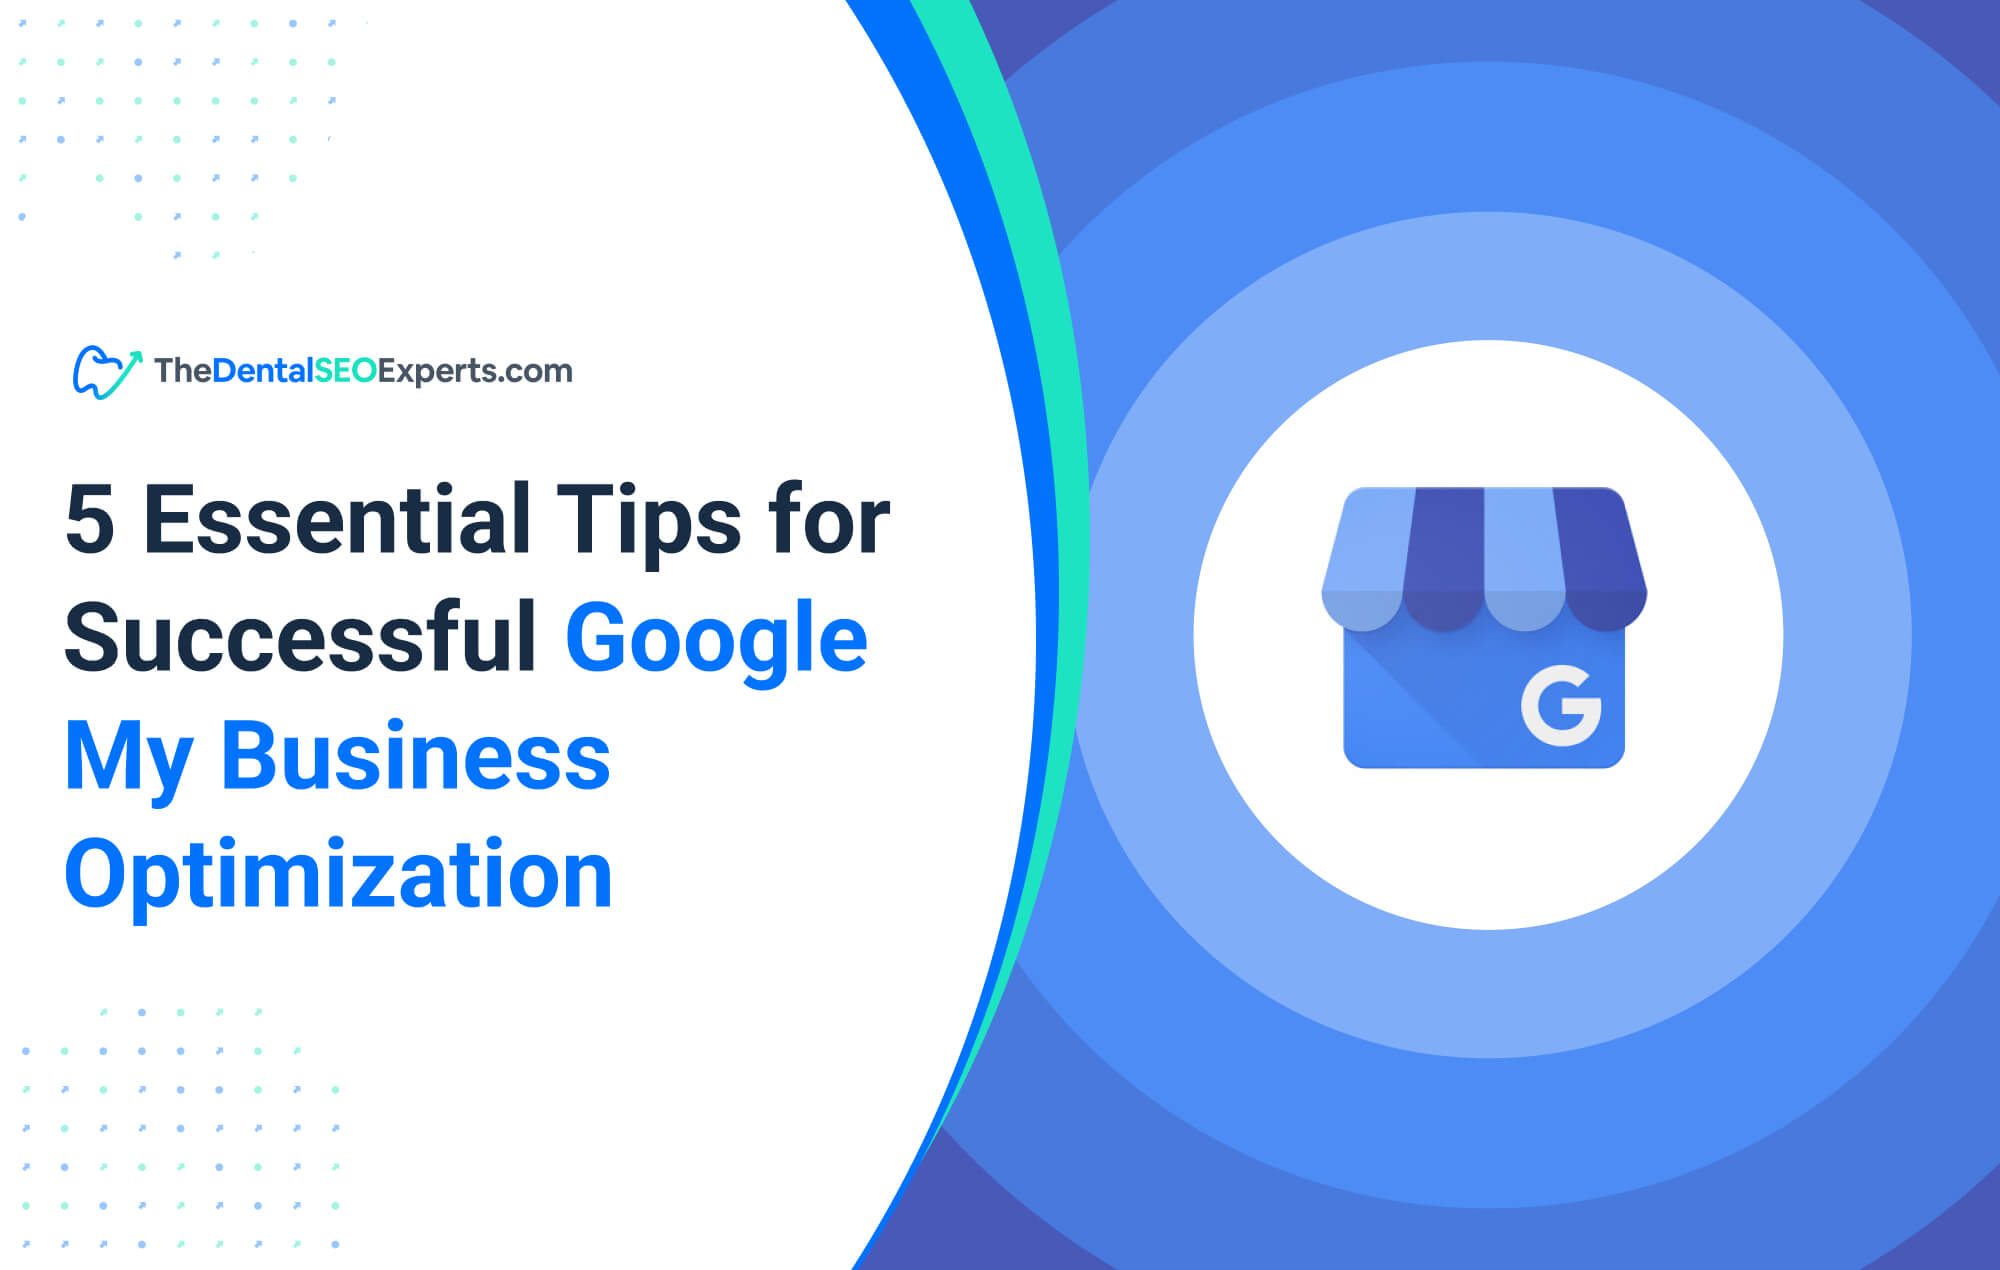 5 Essential Tips for Successful Google My Business Optimization